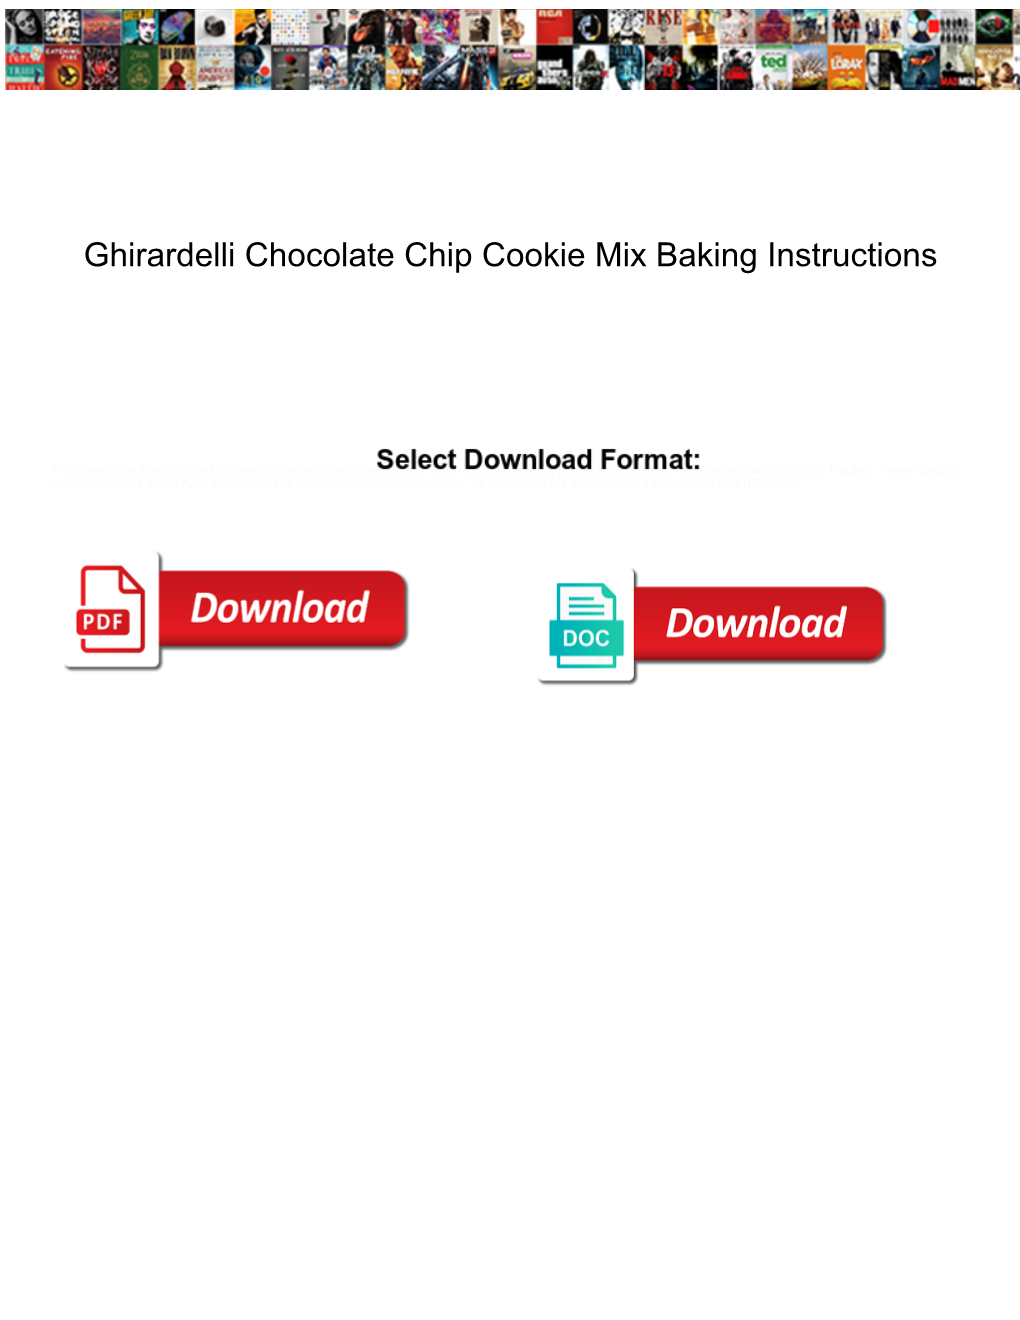 Ghirardelli Chocolate Chip Cookie Mix Baking Instructions